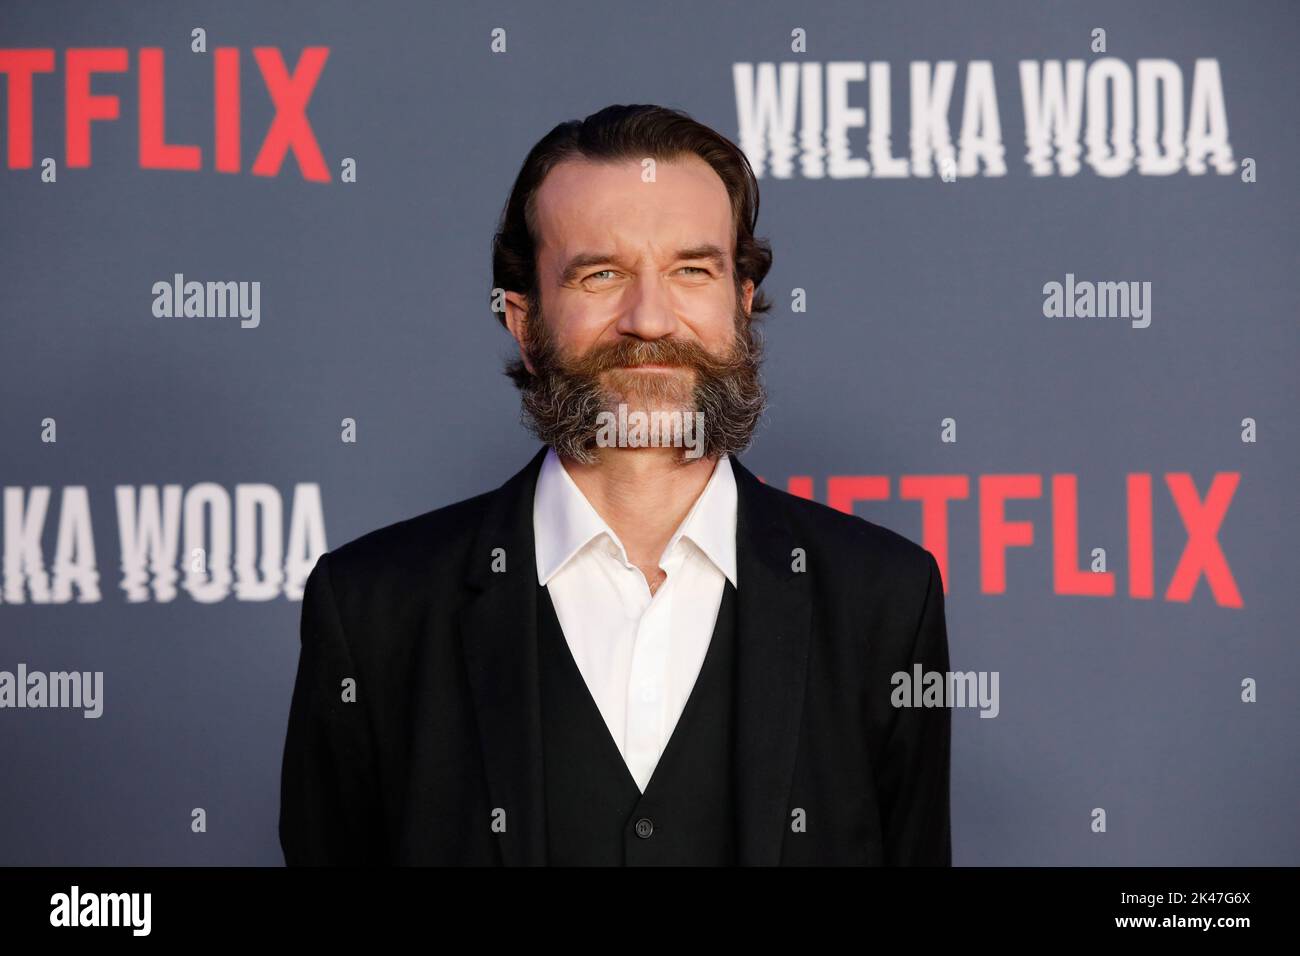 Wroclaw, Poland. September 30th 2022.World premiere of Netflix tv series 'High water' at National Forum of Music. Pictured: actor Tomasz Kot     © Piotr Zajac/Alamy Live News Stock Photo